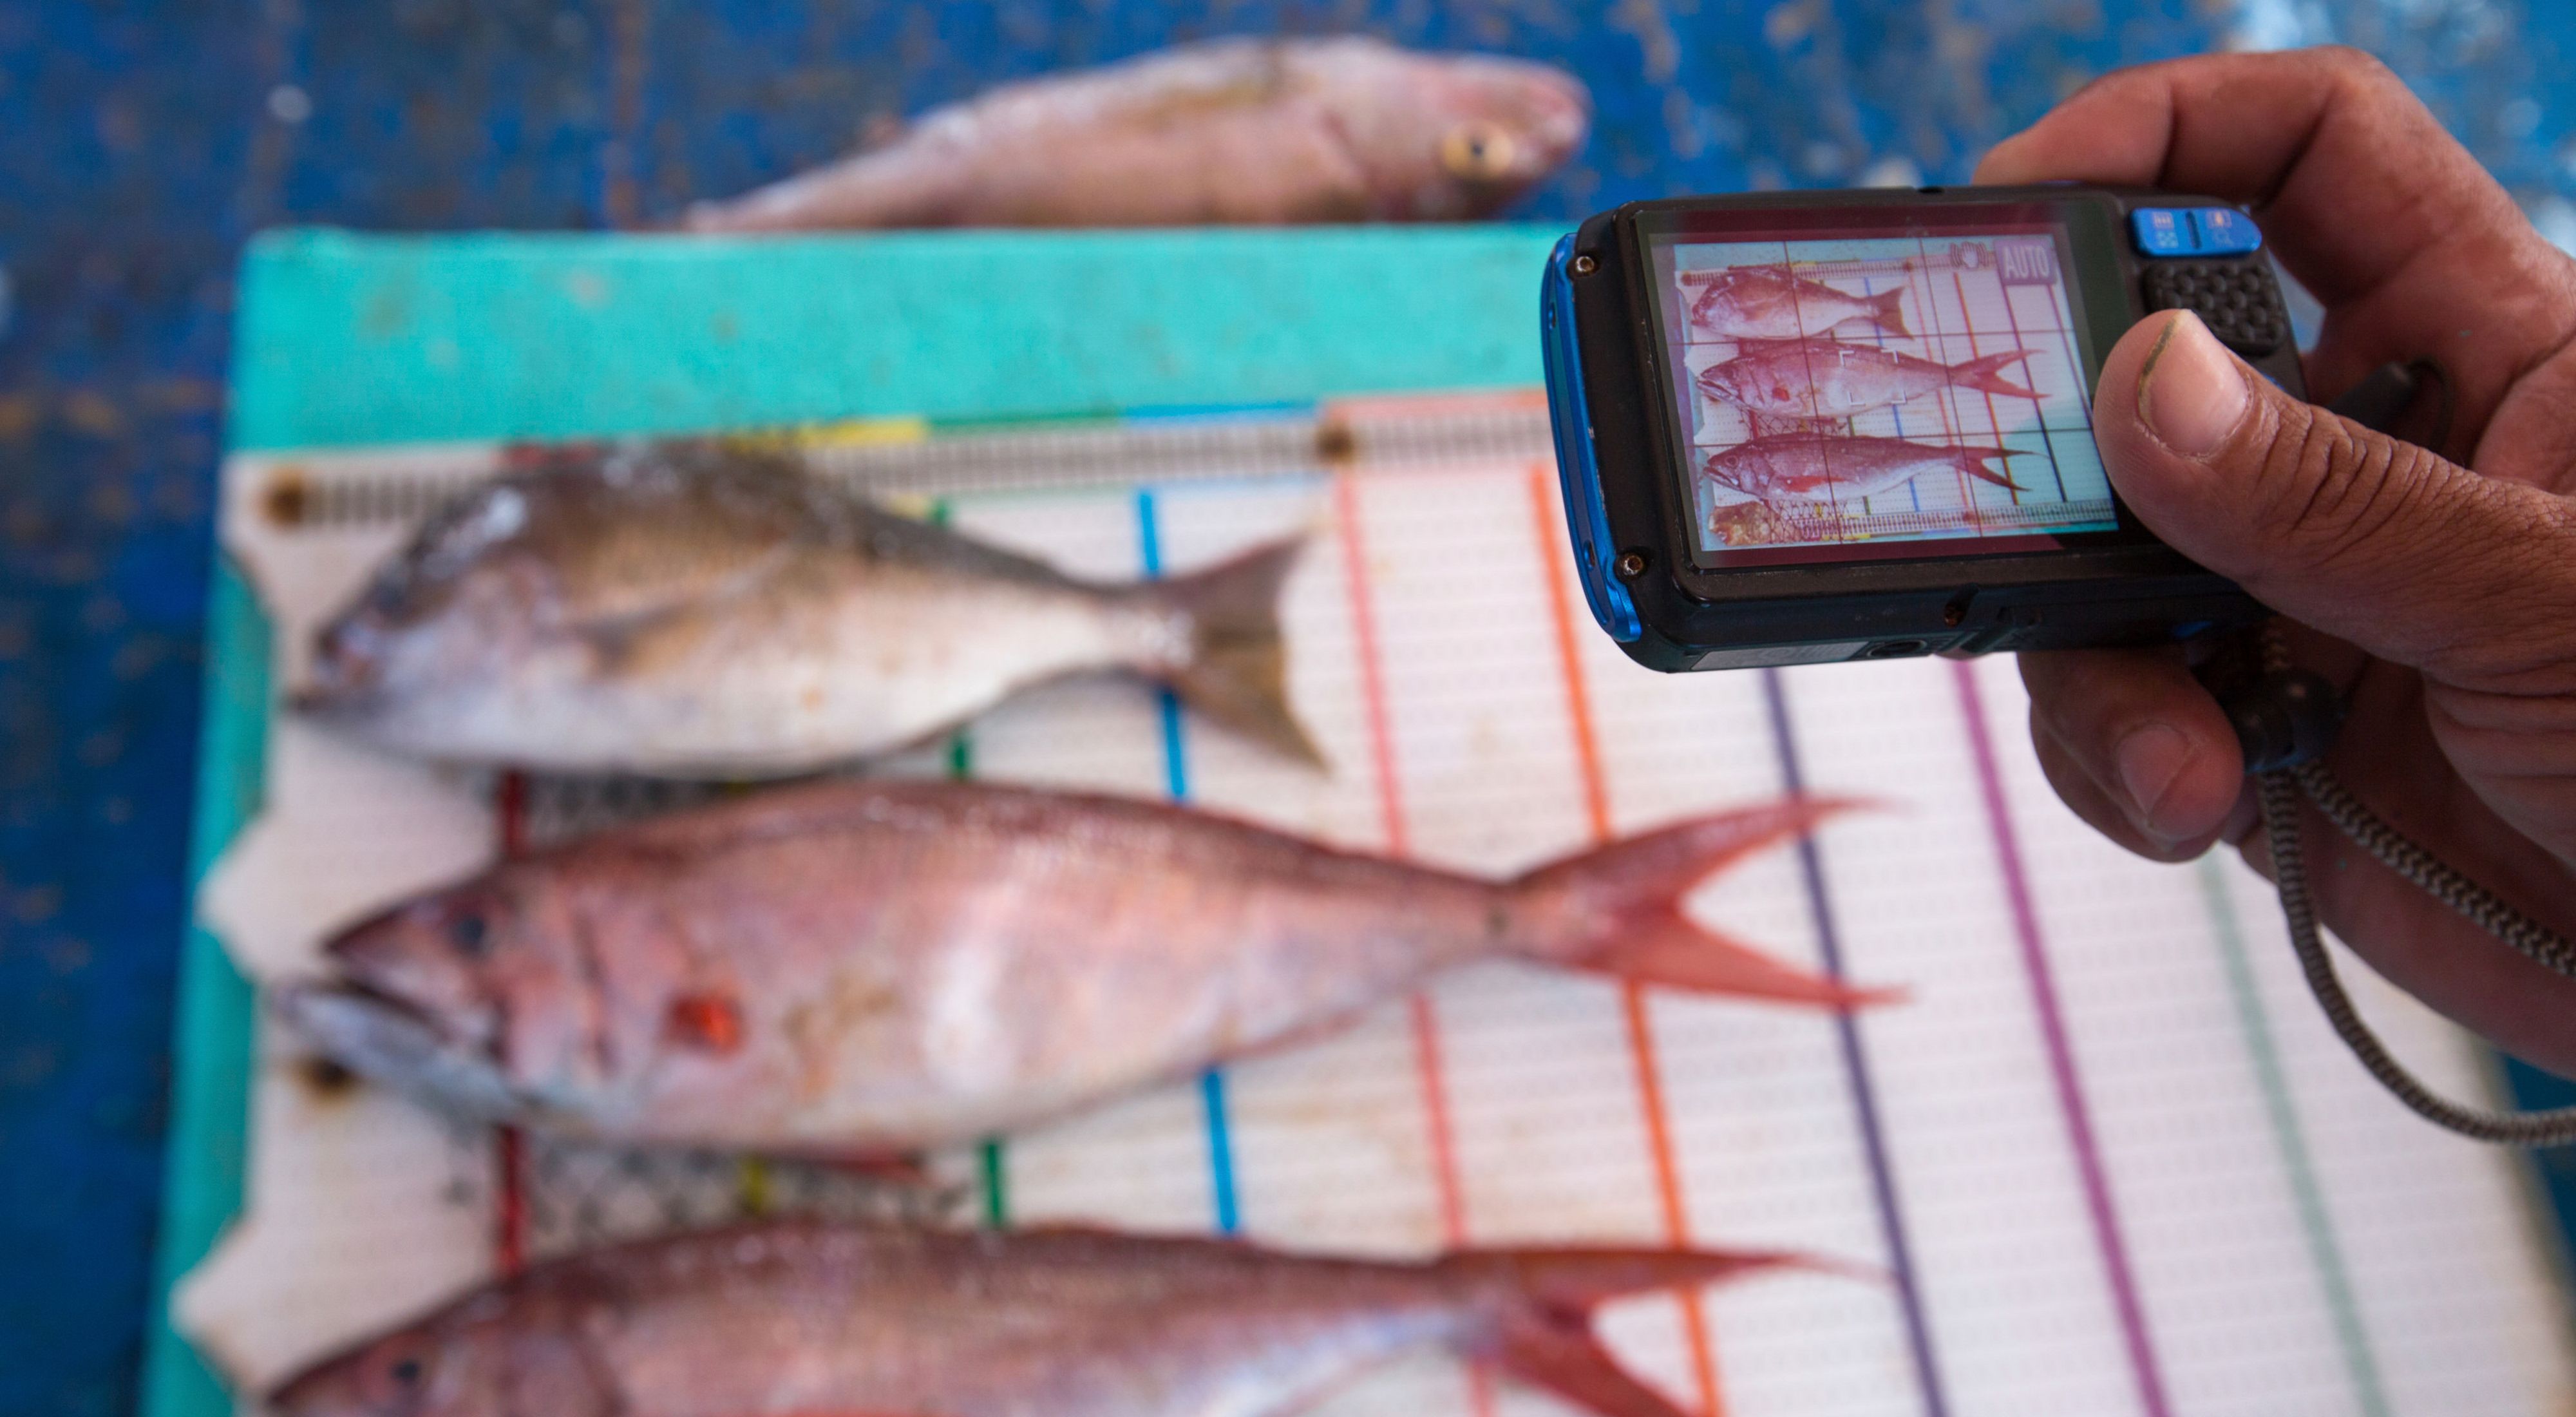 Fish caught by the fishermen on Tetap Setia, a boat participating in TNC's FishFace program, are photographed on a measuring board in Indonesia